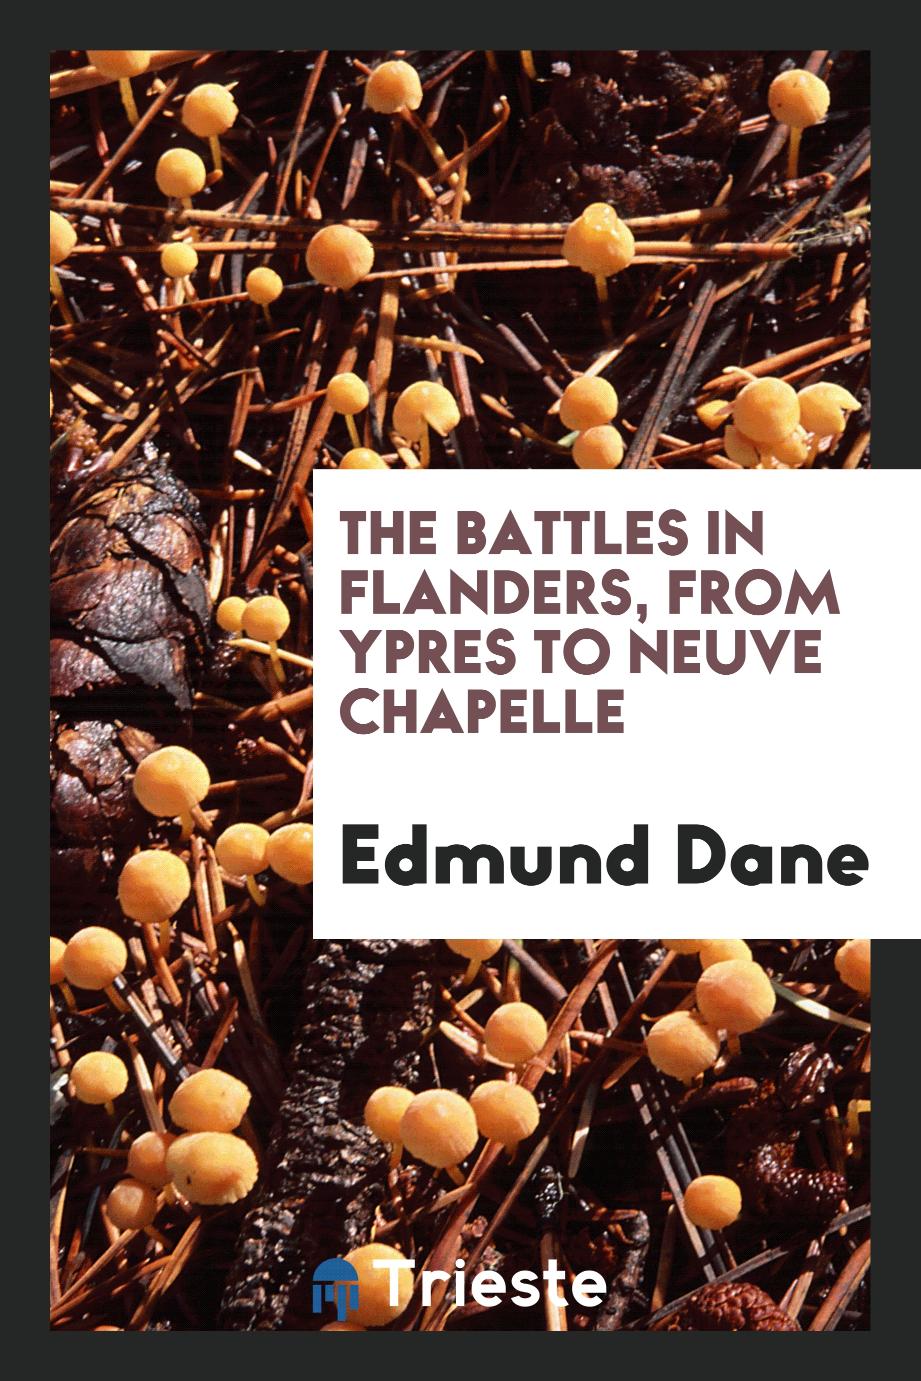 The battles in Flanders, from ypres to Neuve Chapelle